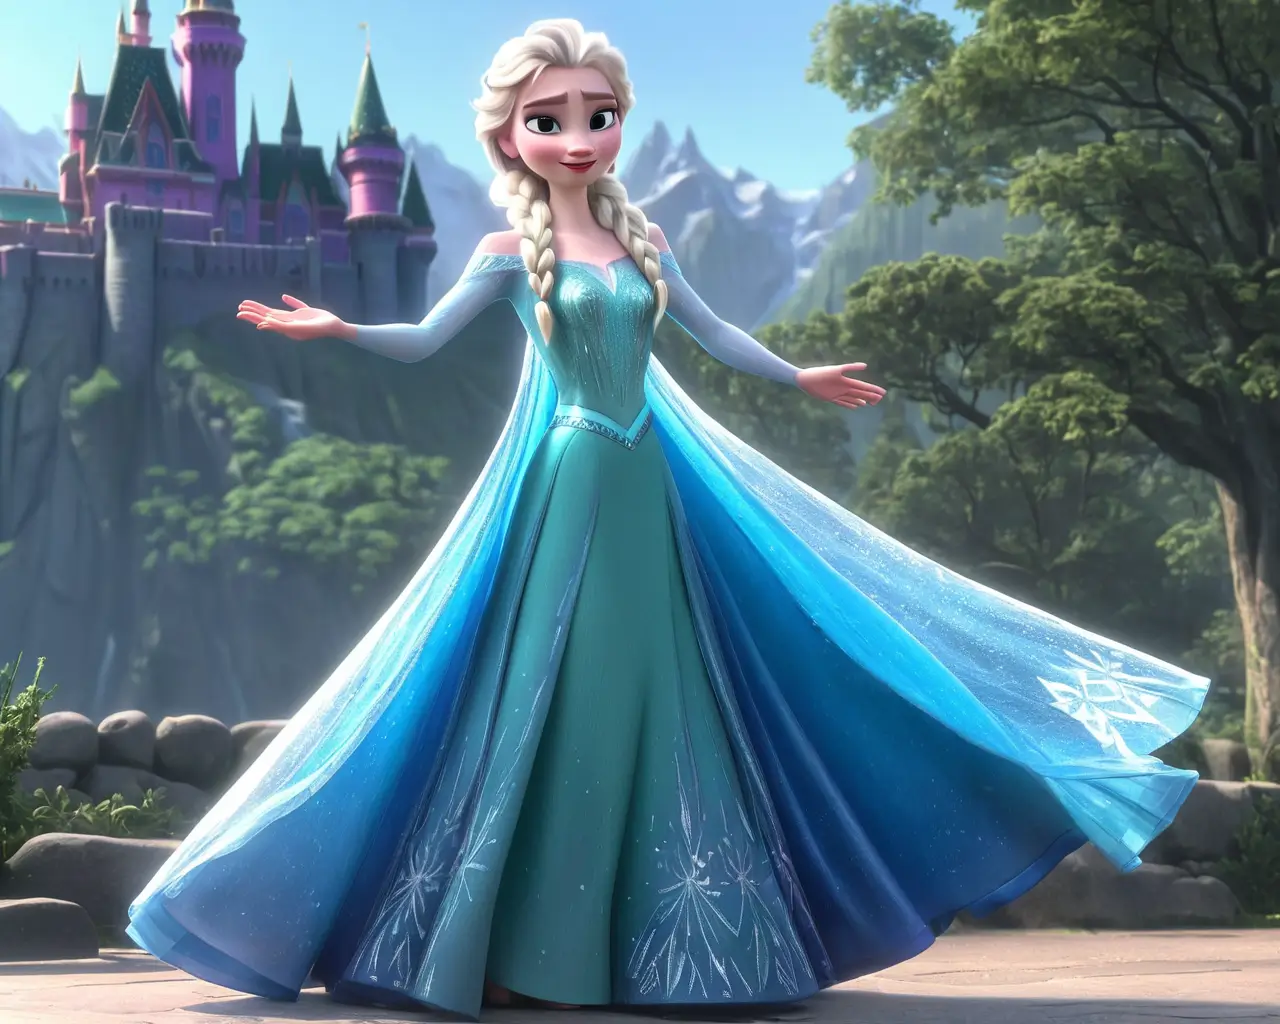 Animated Elsa princess in blue gown before castle